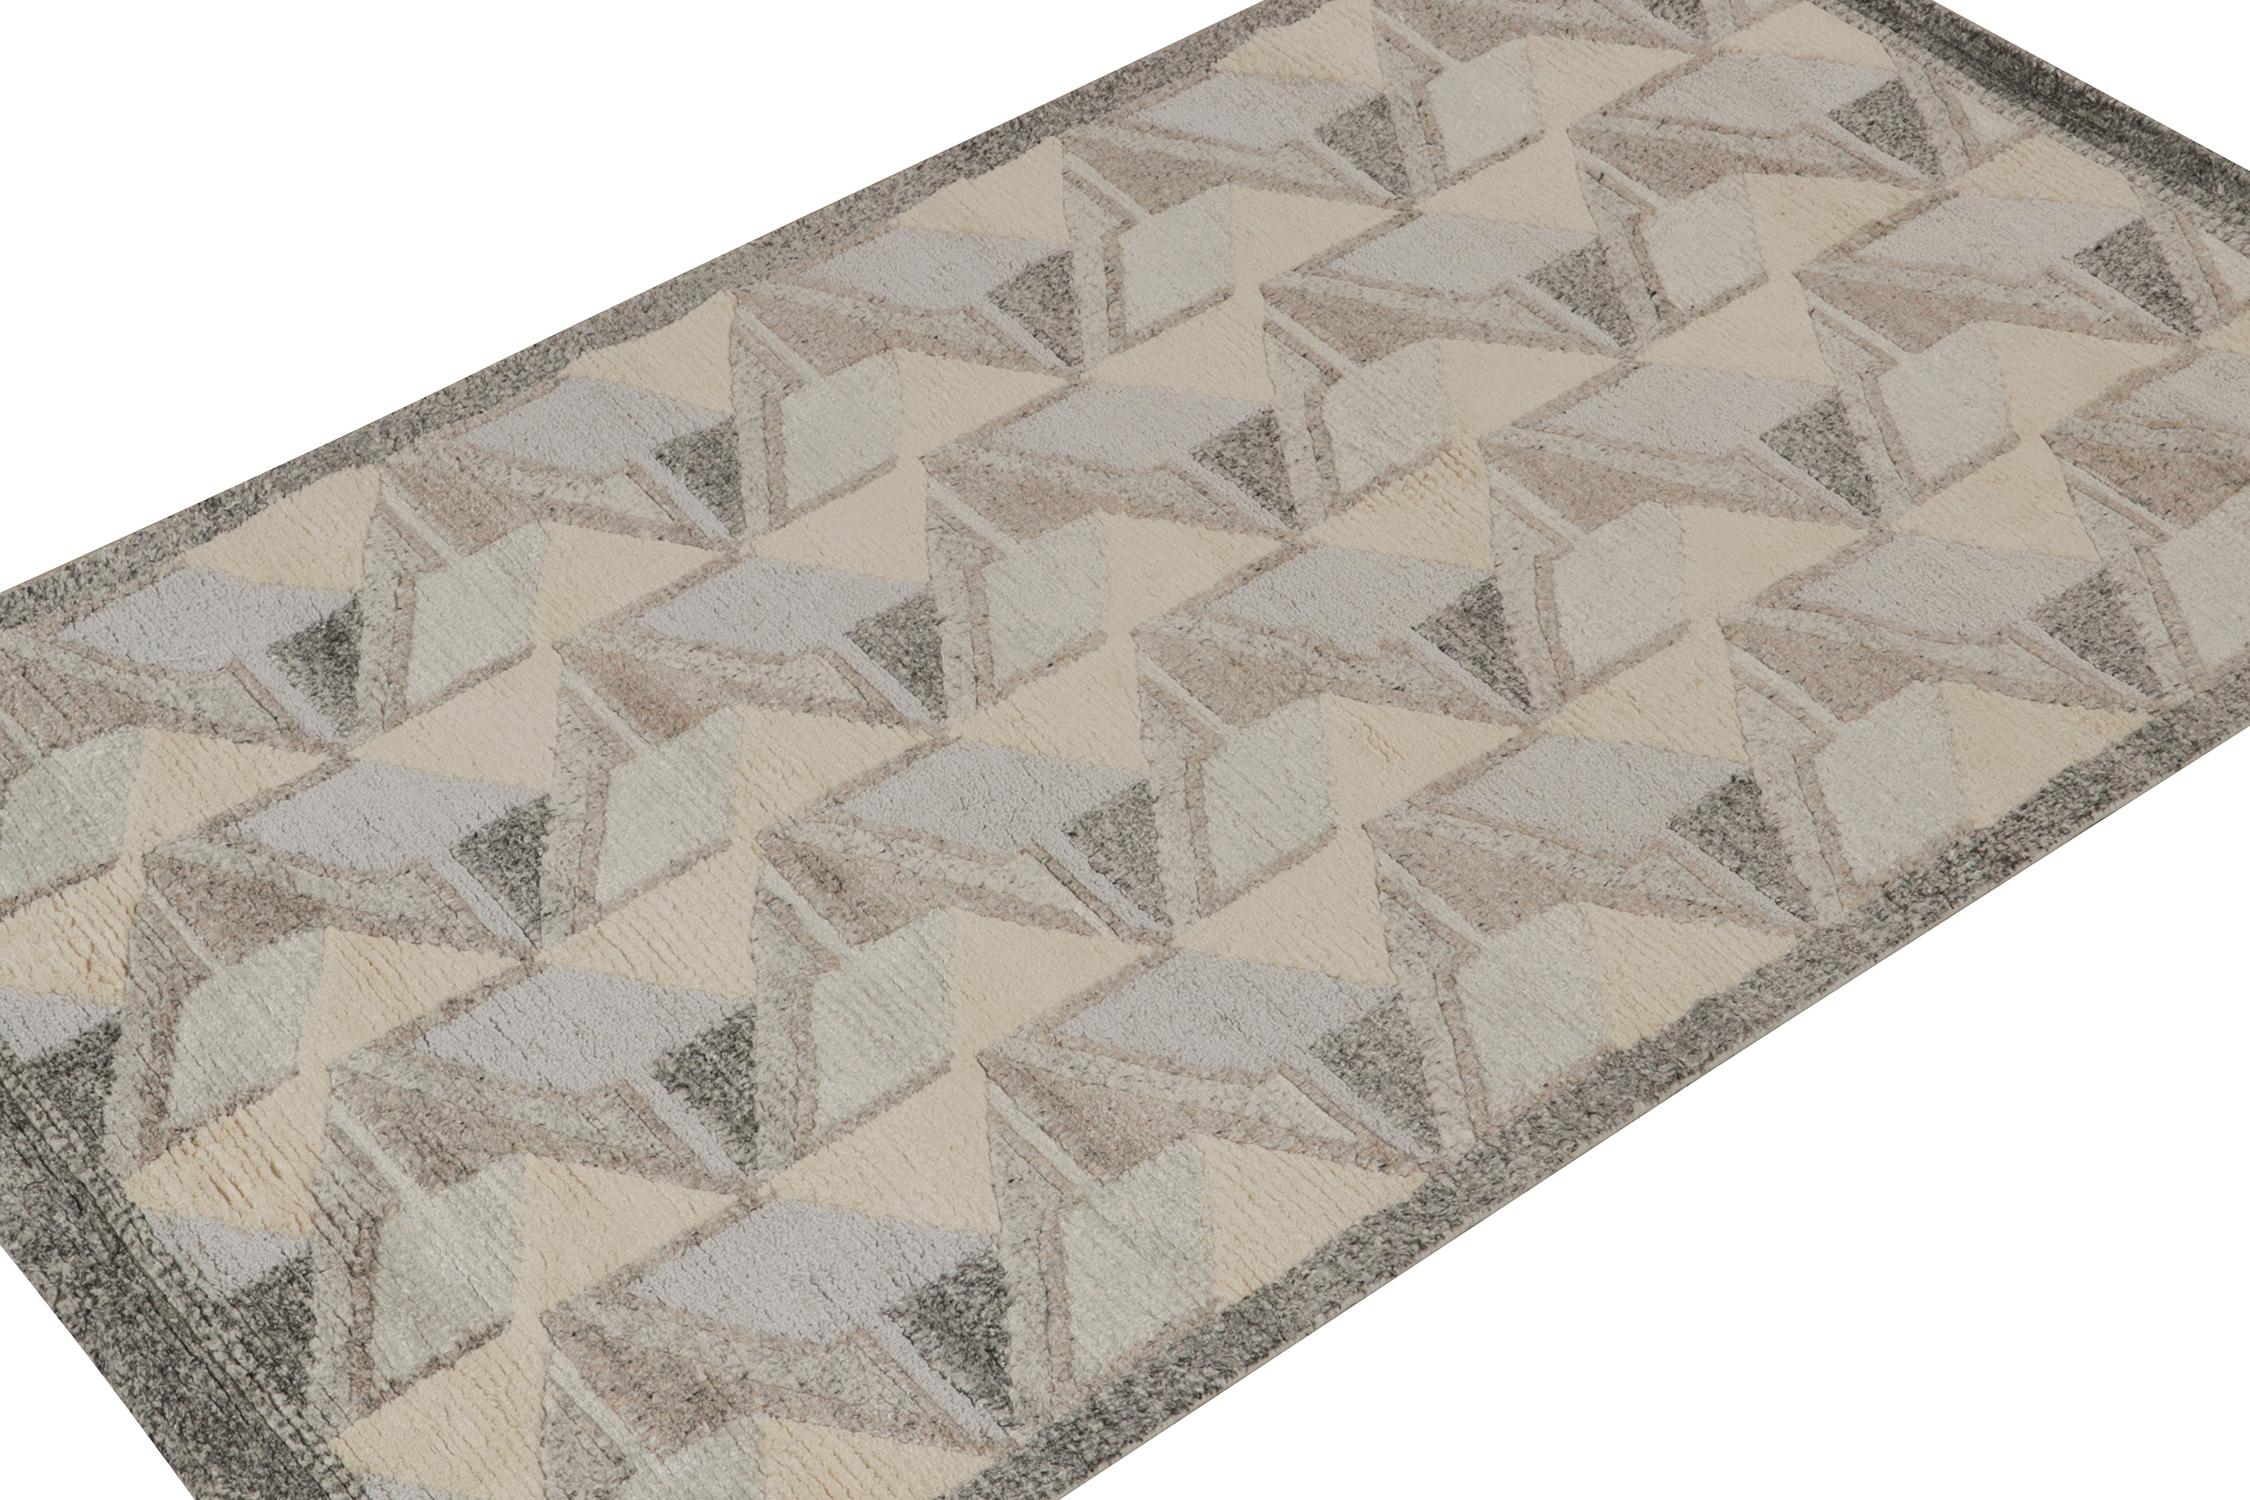 A smart 4x8 Swedish style pile rug from our award-winning Scandinavian collection. Hand-knotted in wool. 
On the Design: 
This rug enjoys a natural movement with crisp geometric patterns in ivory, blue and gray with cool, complementary presence.